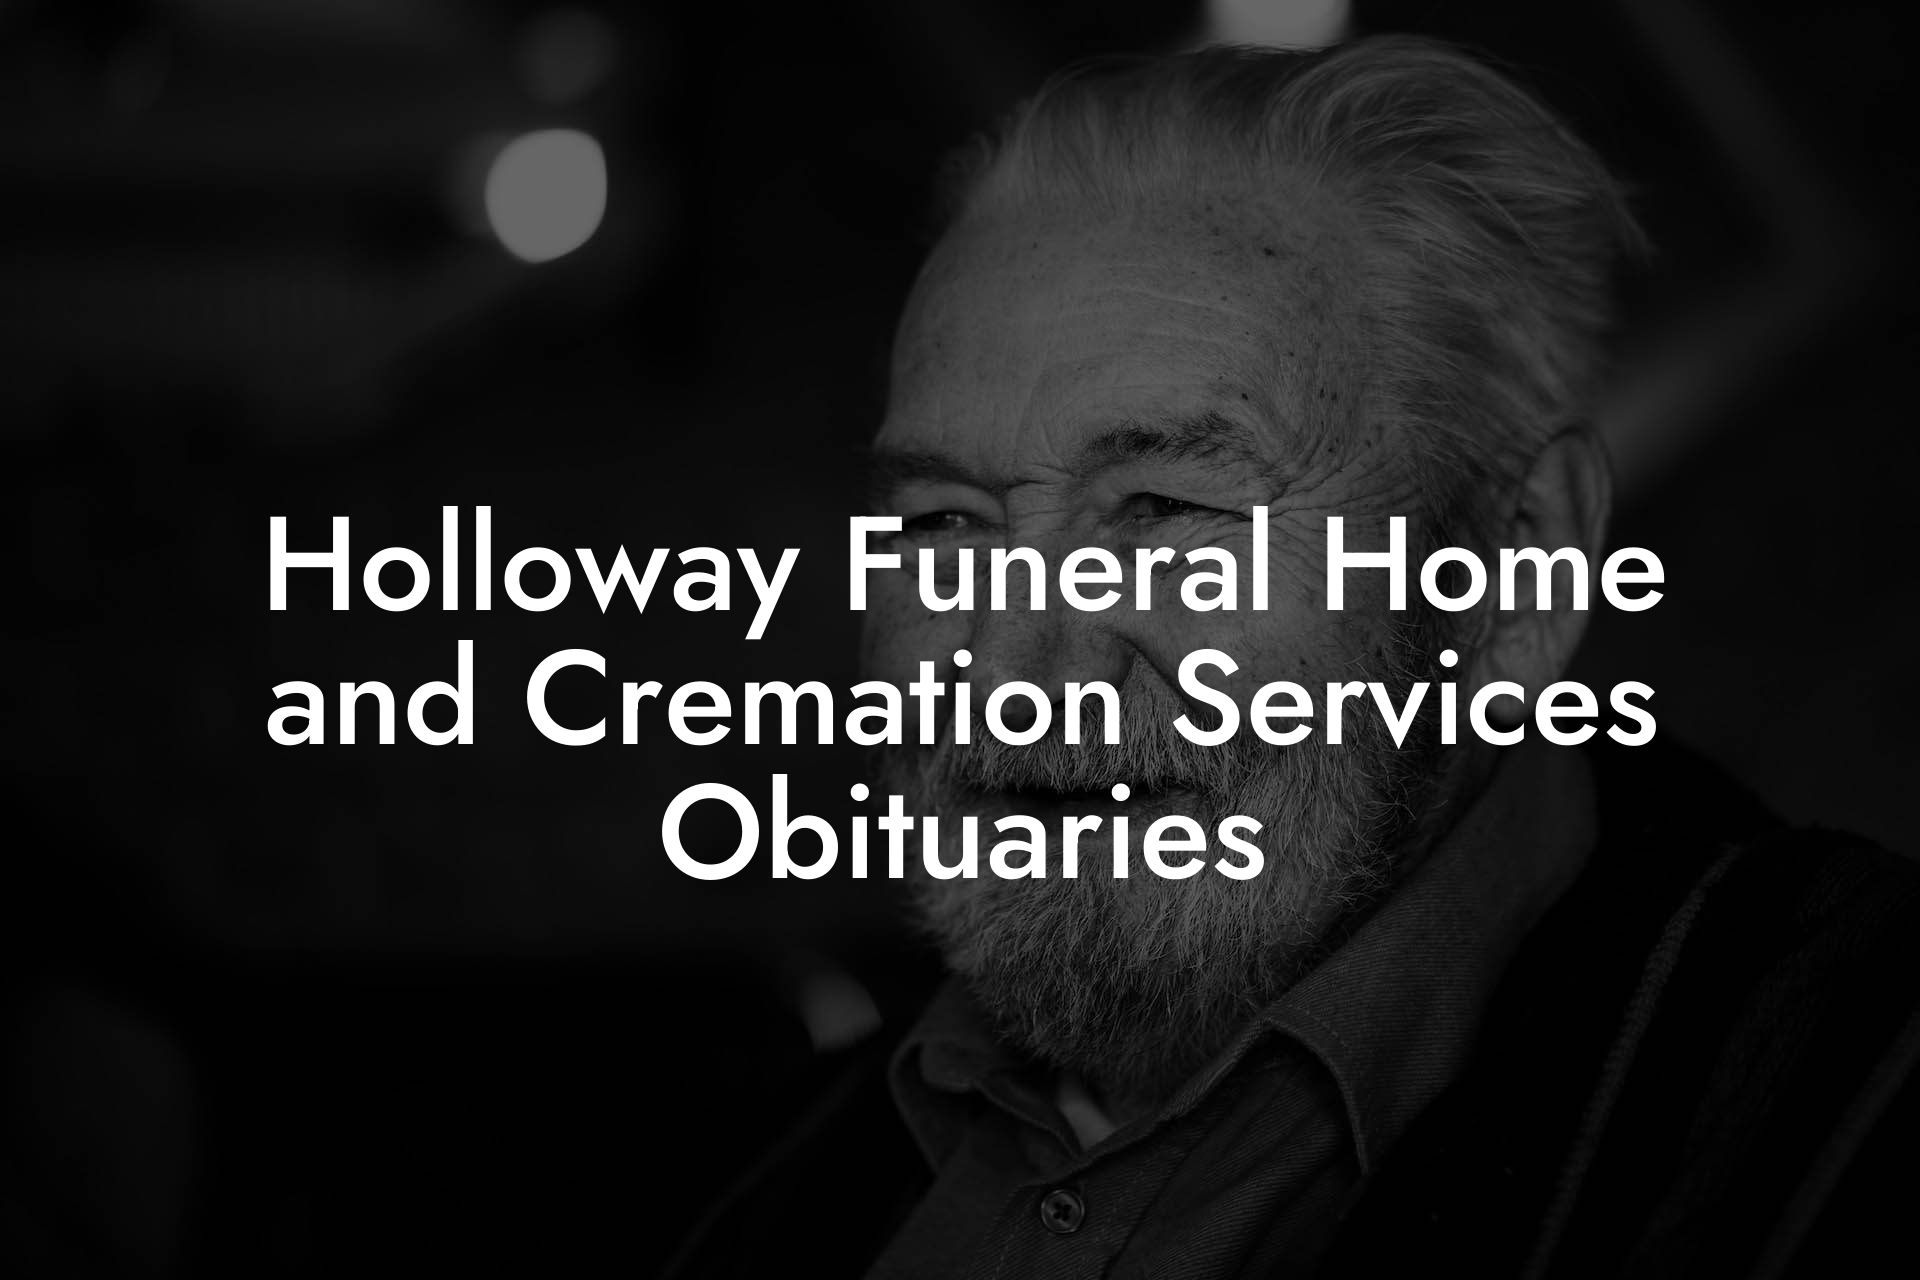 Holloway Funeral Home and Cremation Services Obituaries